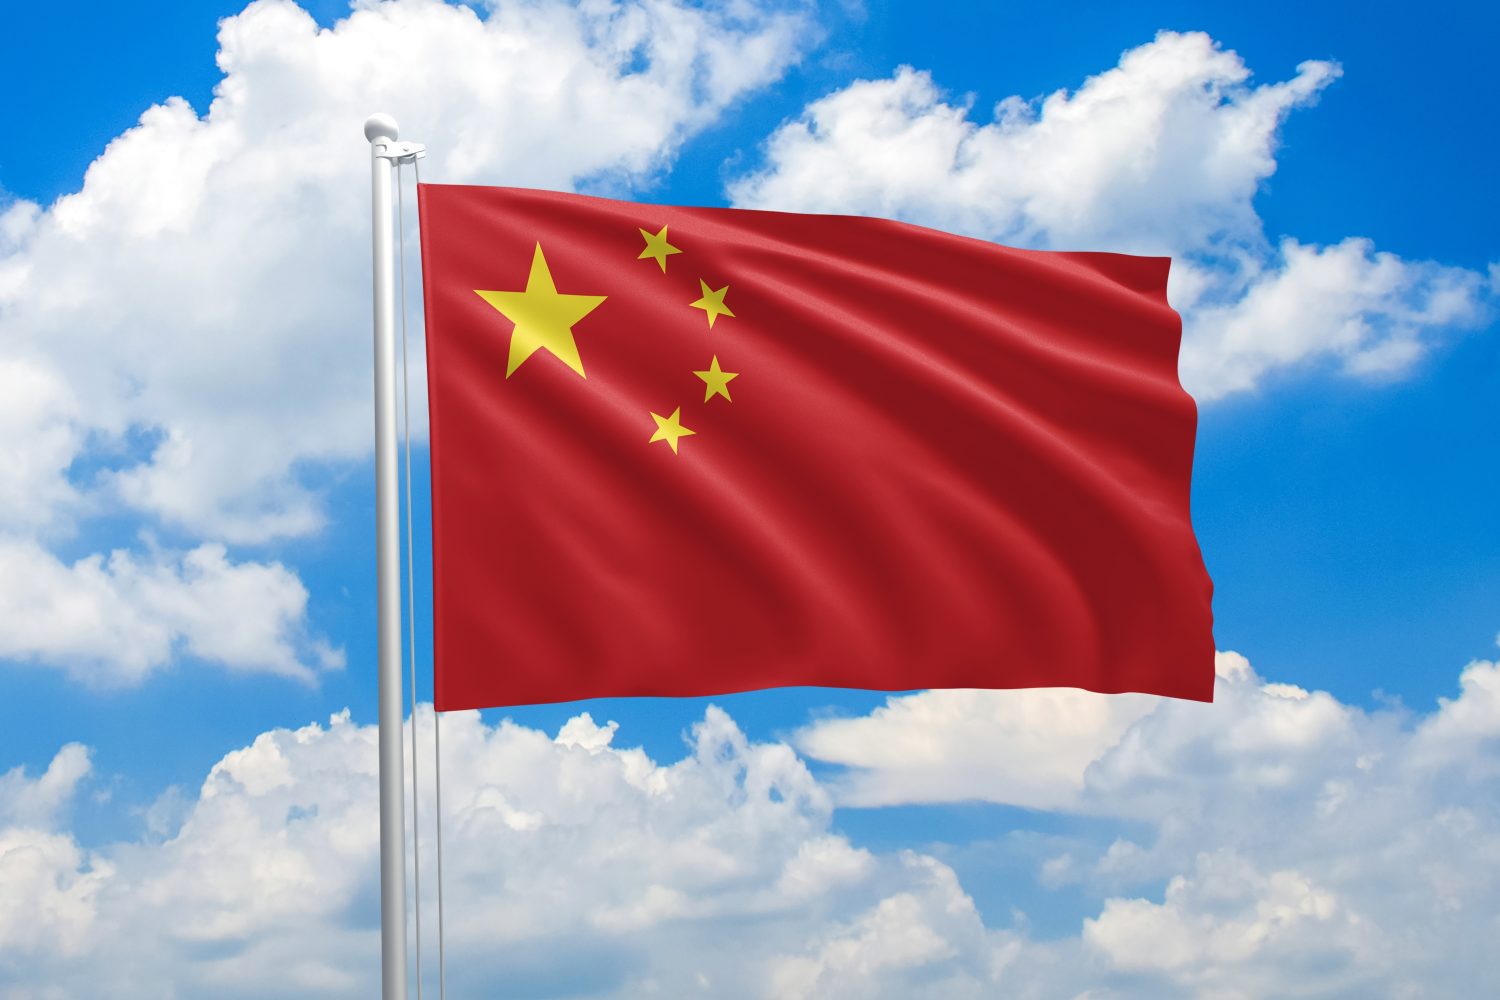 China national flag waving in the wind on clouds sky. High quality fabric. International relations concept